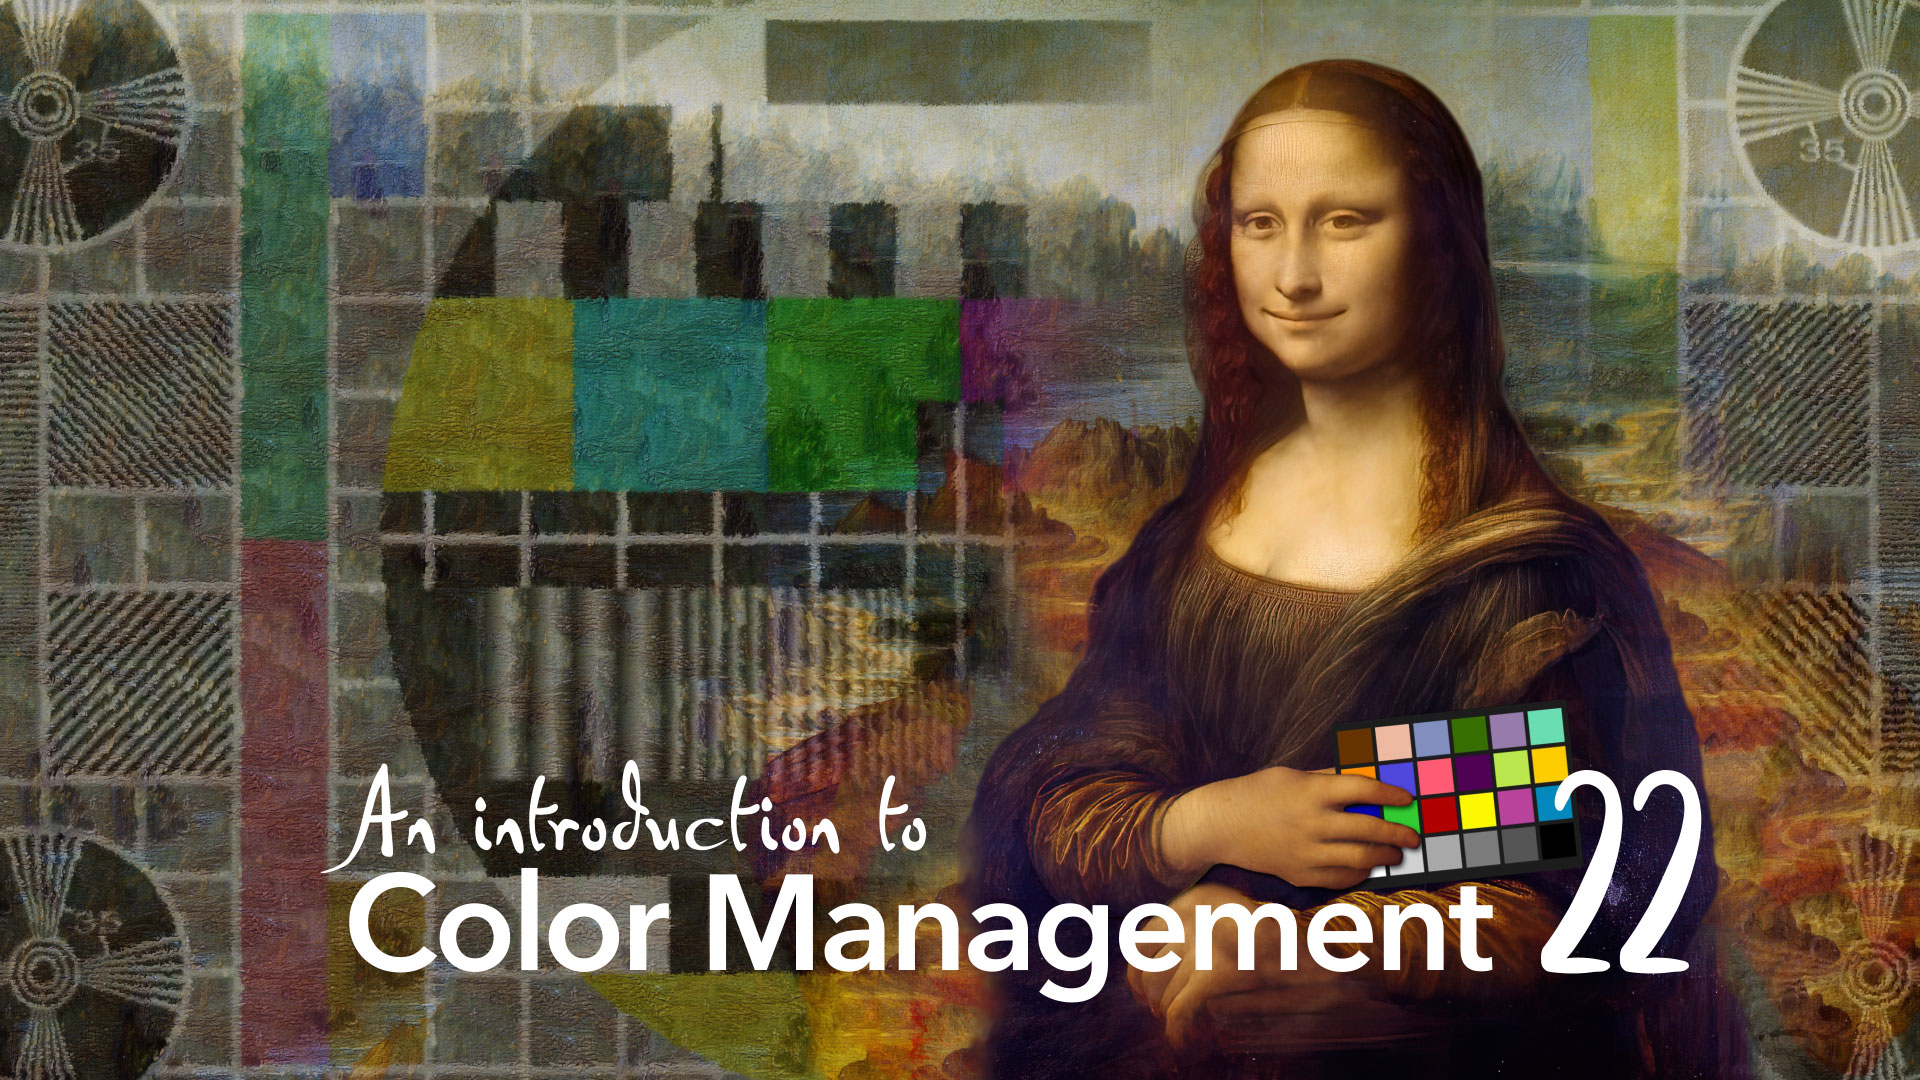 Color Management Part 22: Introducing Tone Mapping 4